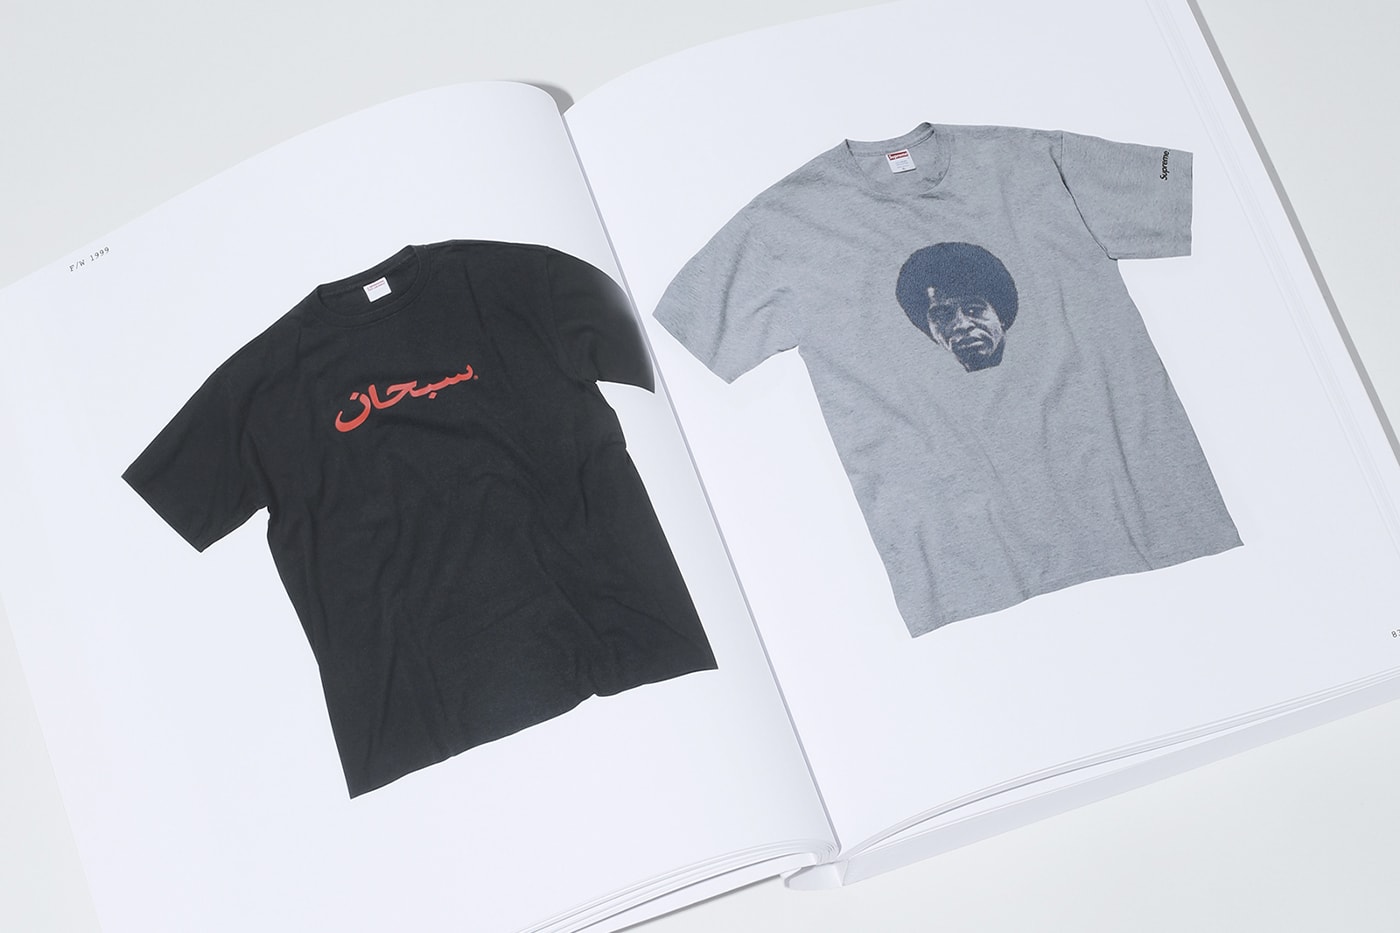 Supreme '30 Years: T-Shirts 1994-2024' Book release info